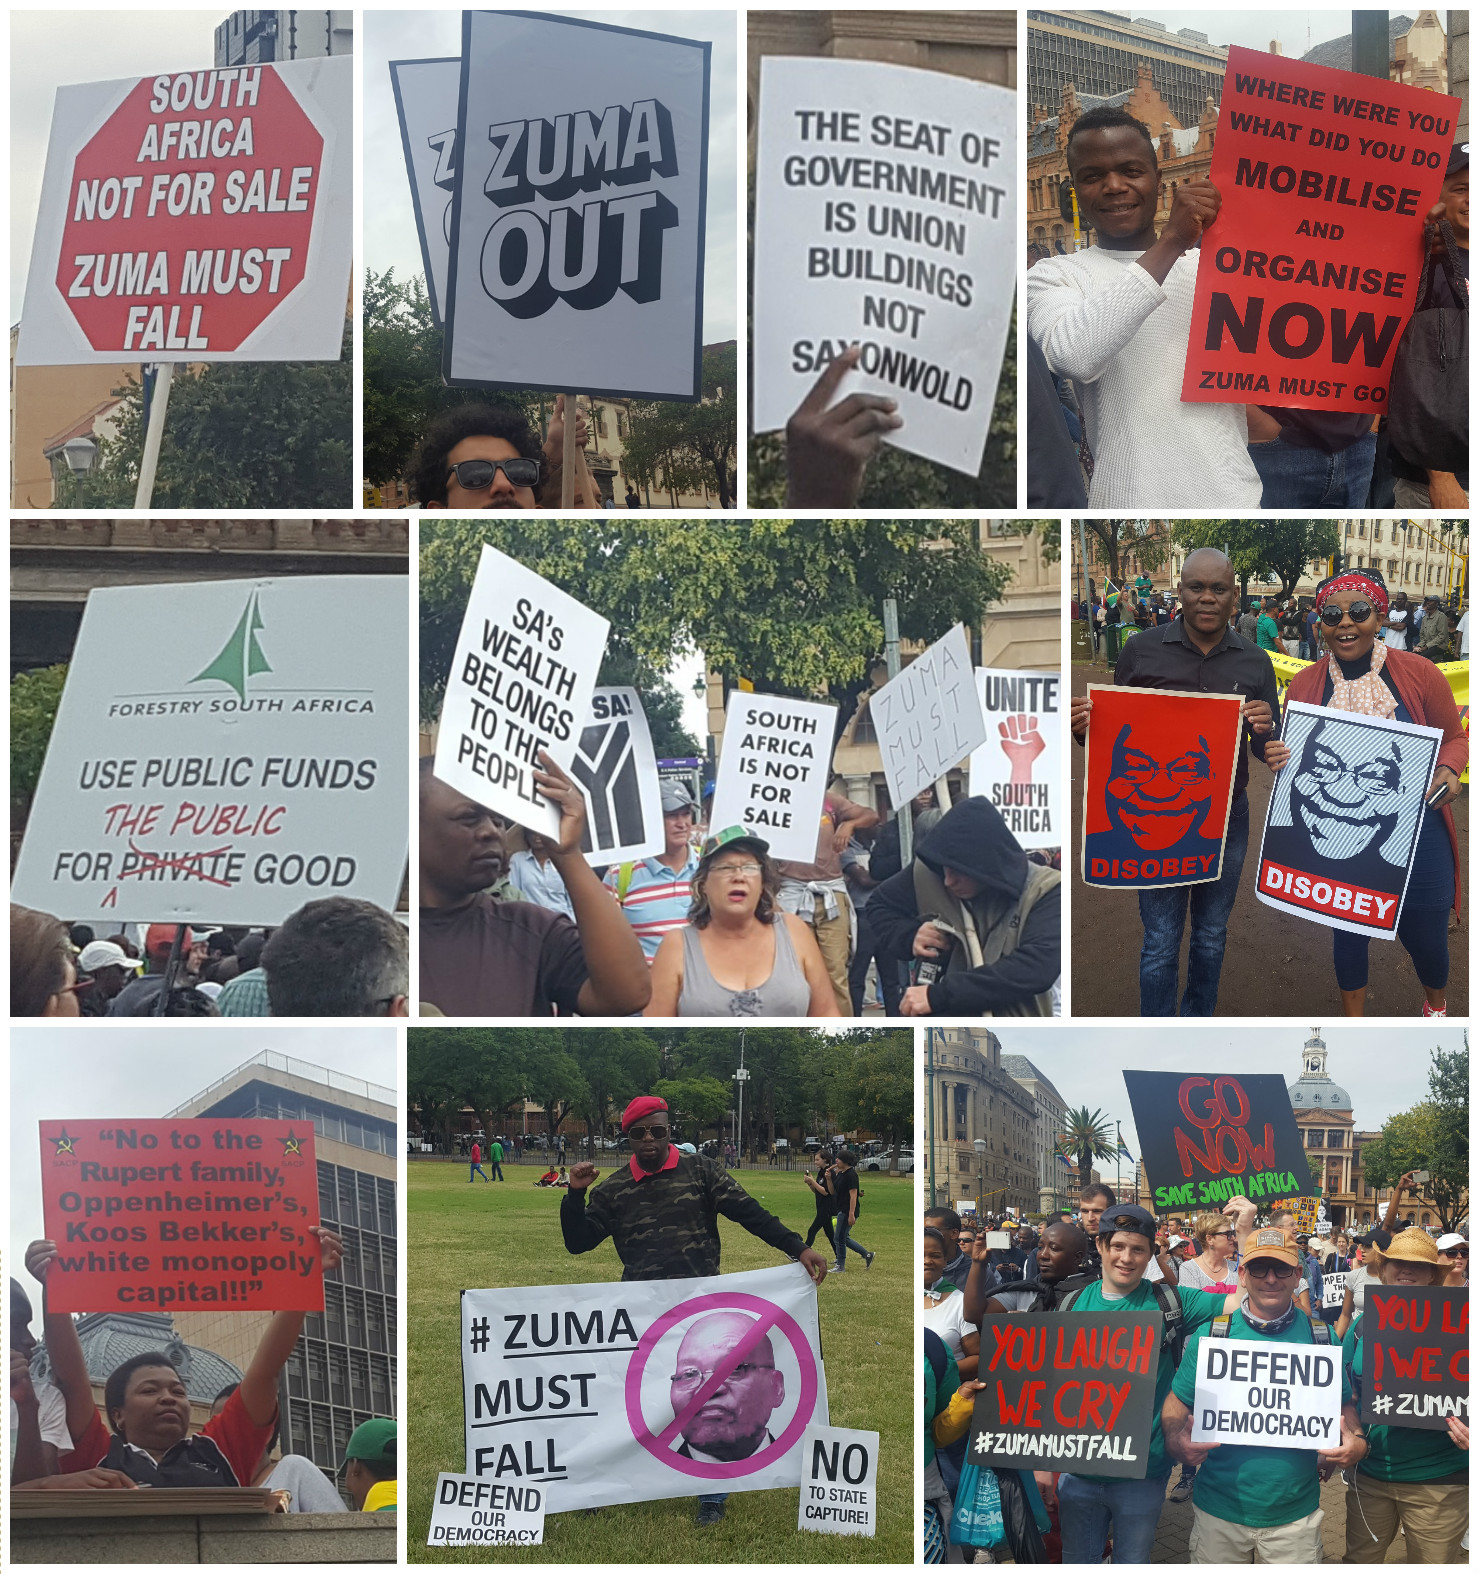 Some of the messages of protest on posters during the anti Zuma marches in Pretoria